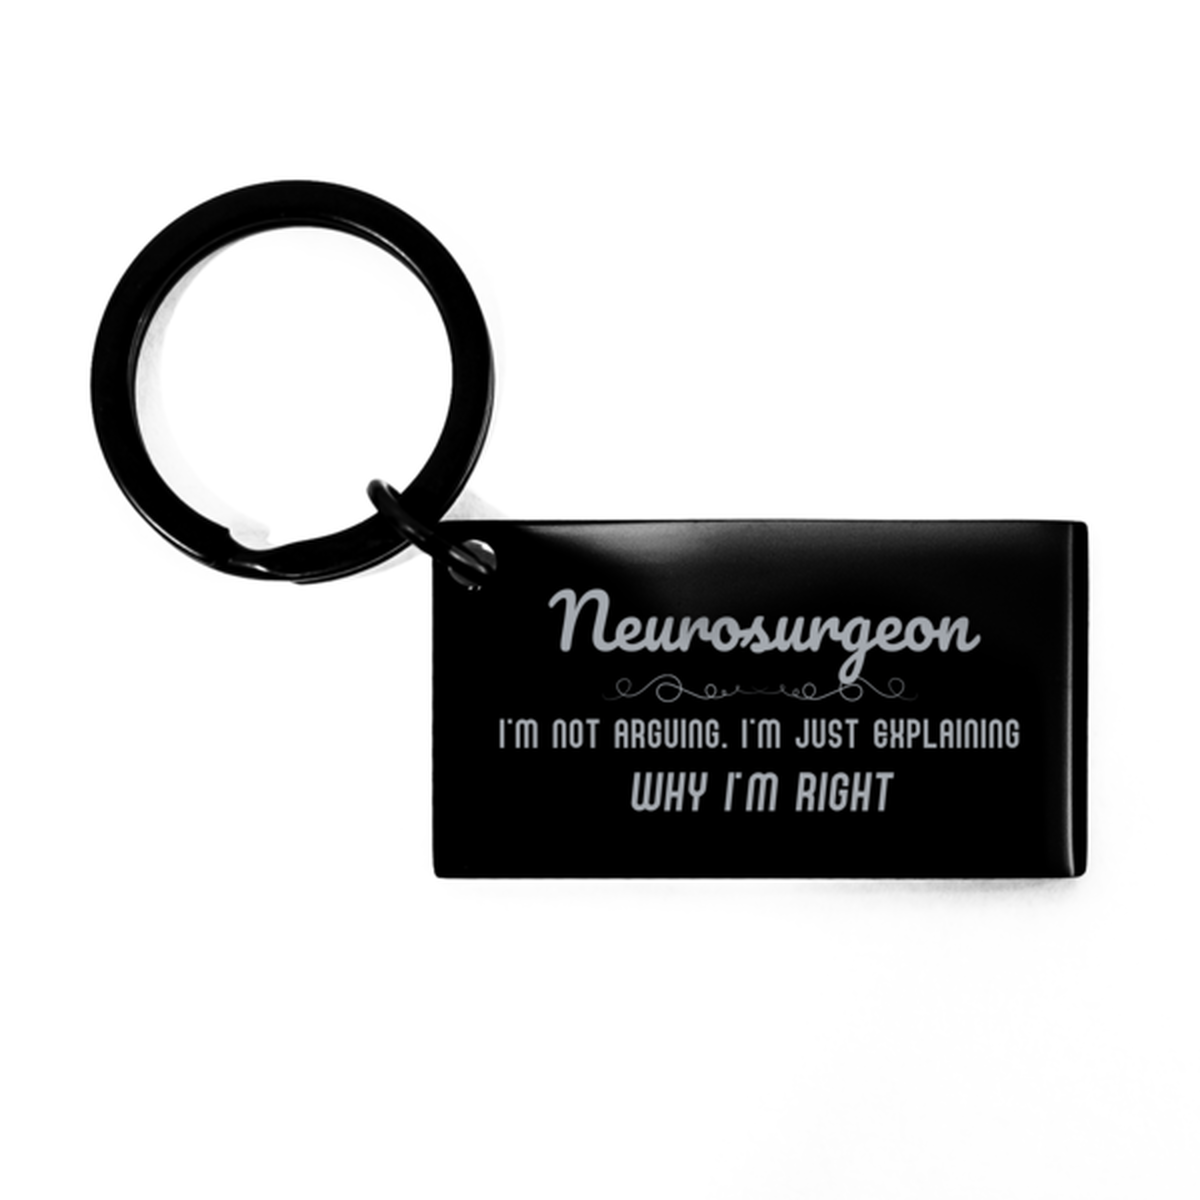 Neurosurgeon I'm not Arguing. I'm Just Explaining Why I'm RIGHT Keychain, Funny Saying Quote Neurosurgeon Gifts For Neurosurgeon Graduation Birthday Christmas Gifts for Men Women Coworker